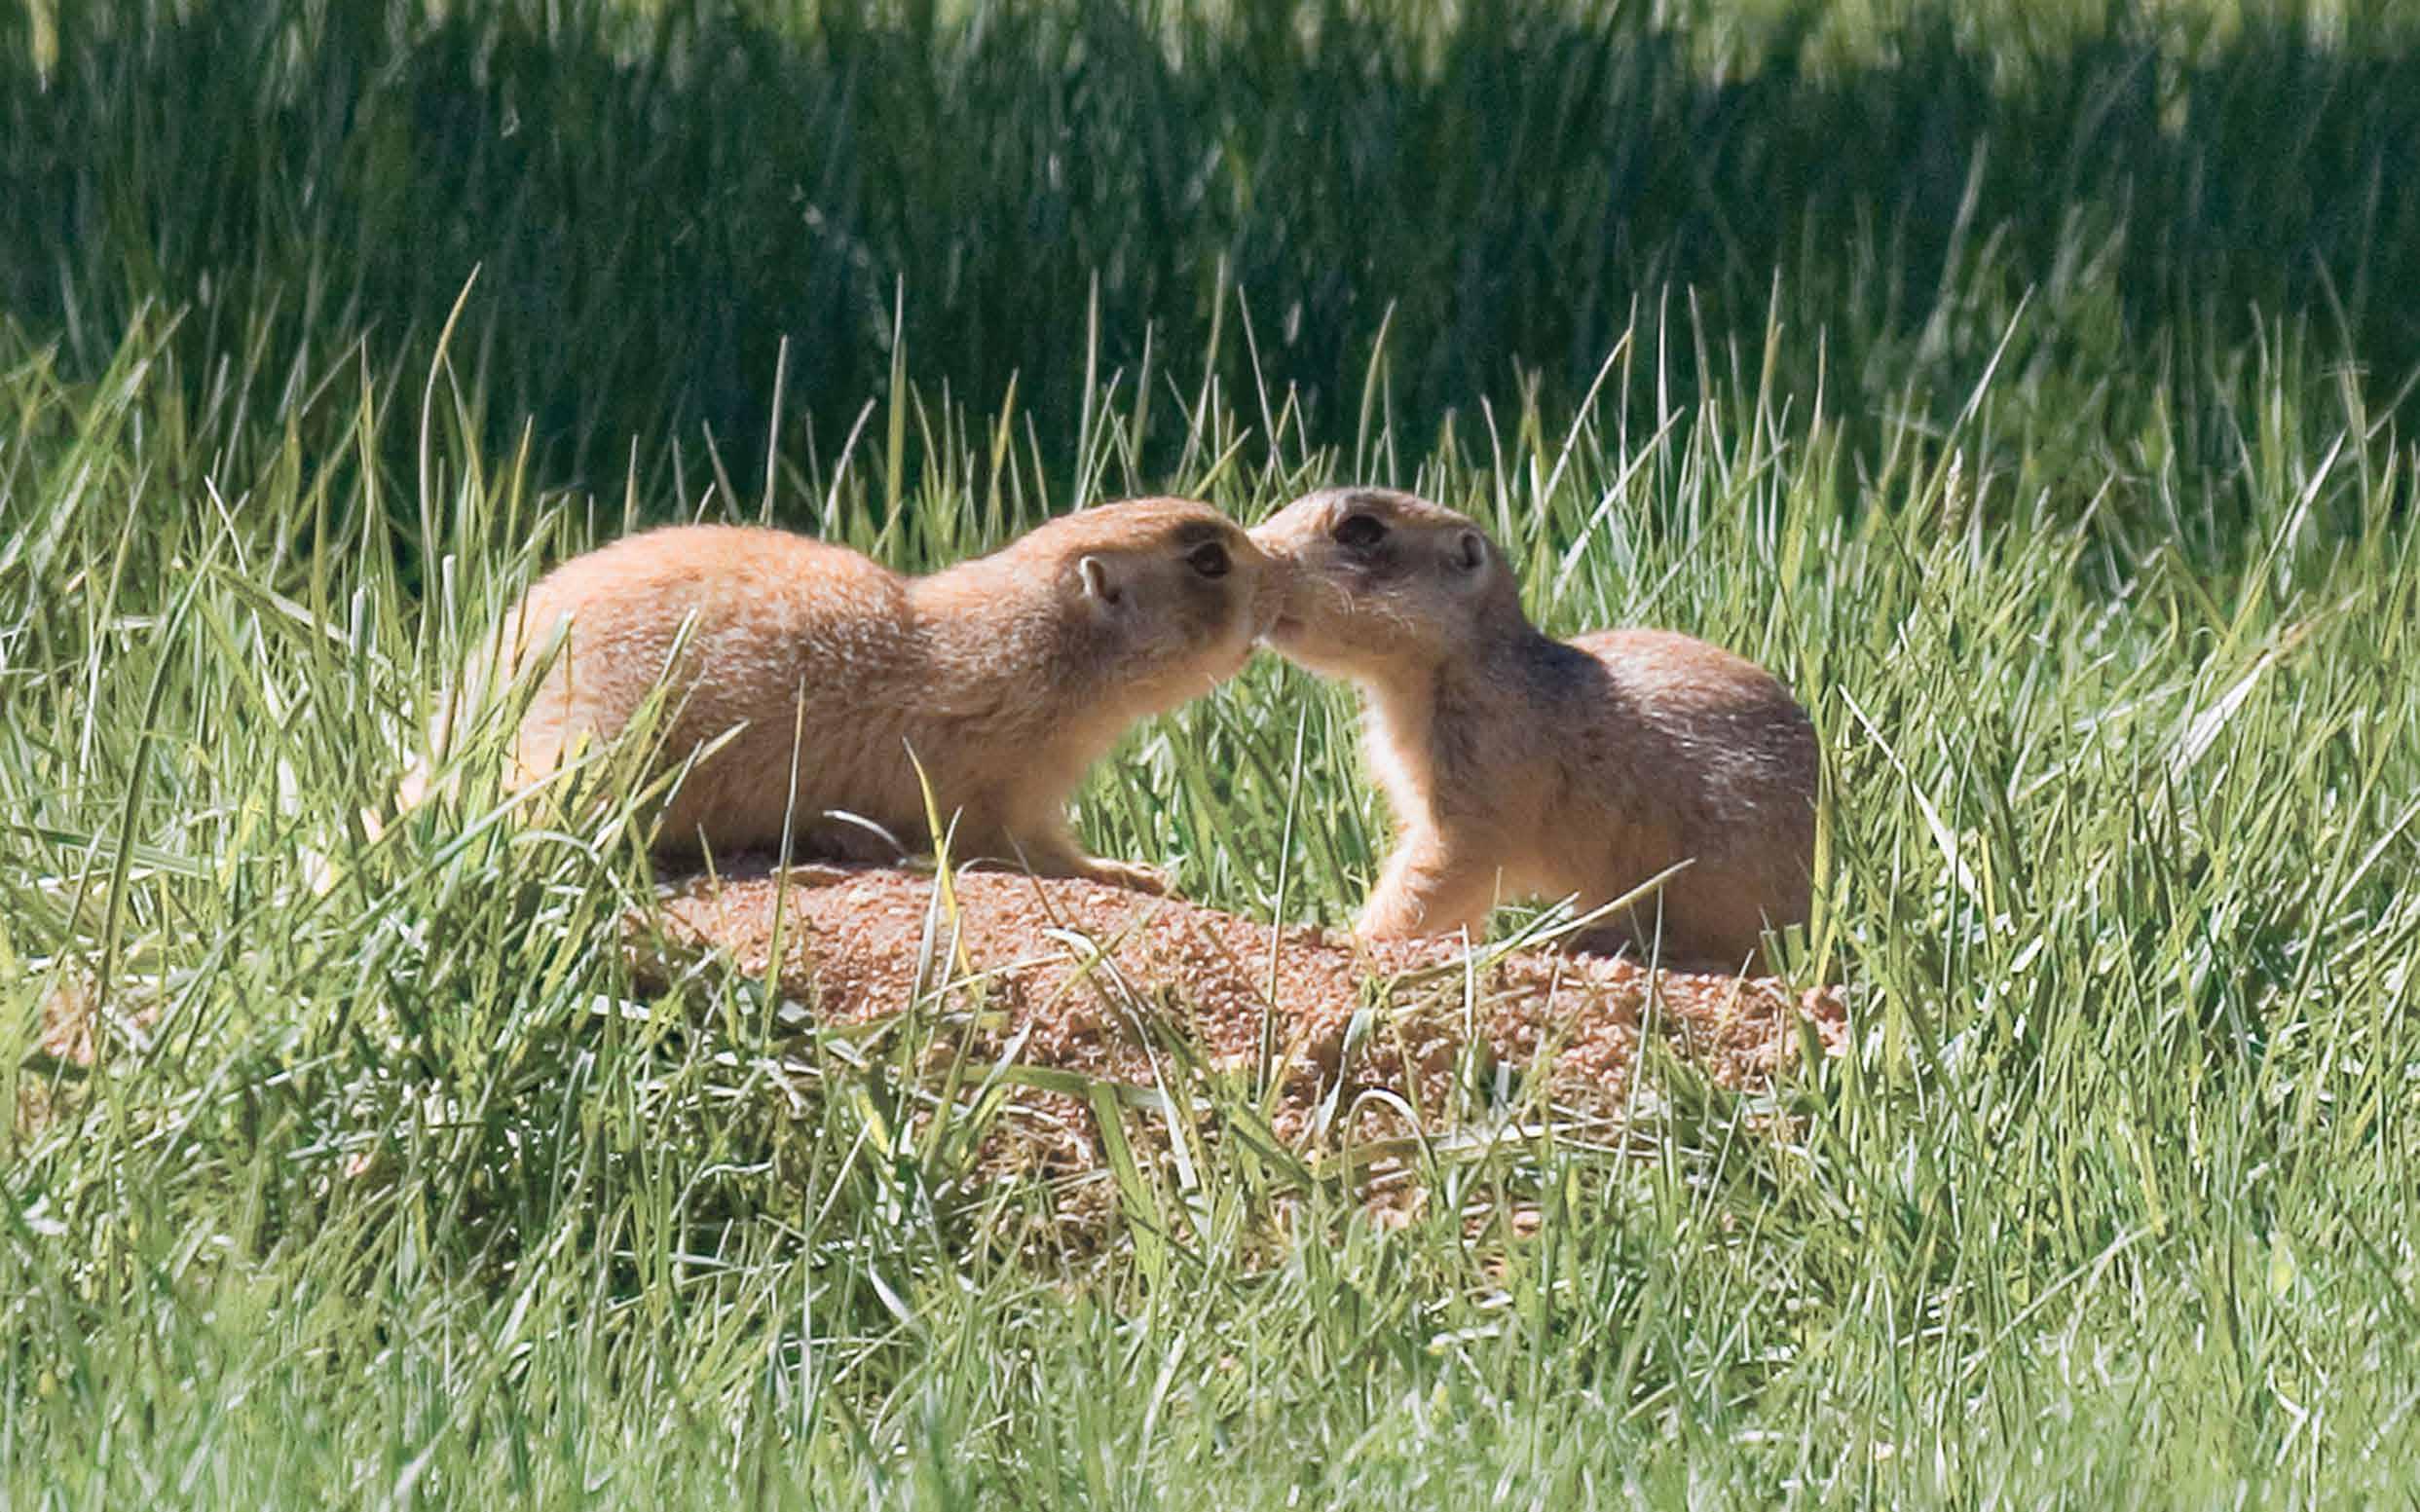 how did the prairie dog get its name and where did the rodent that is not a dog come from